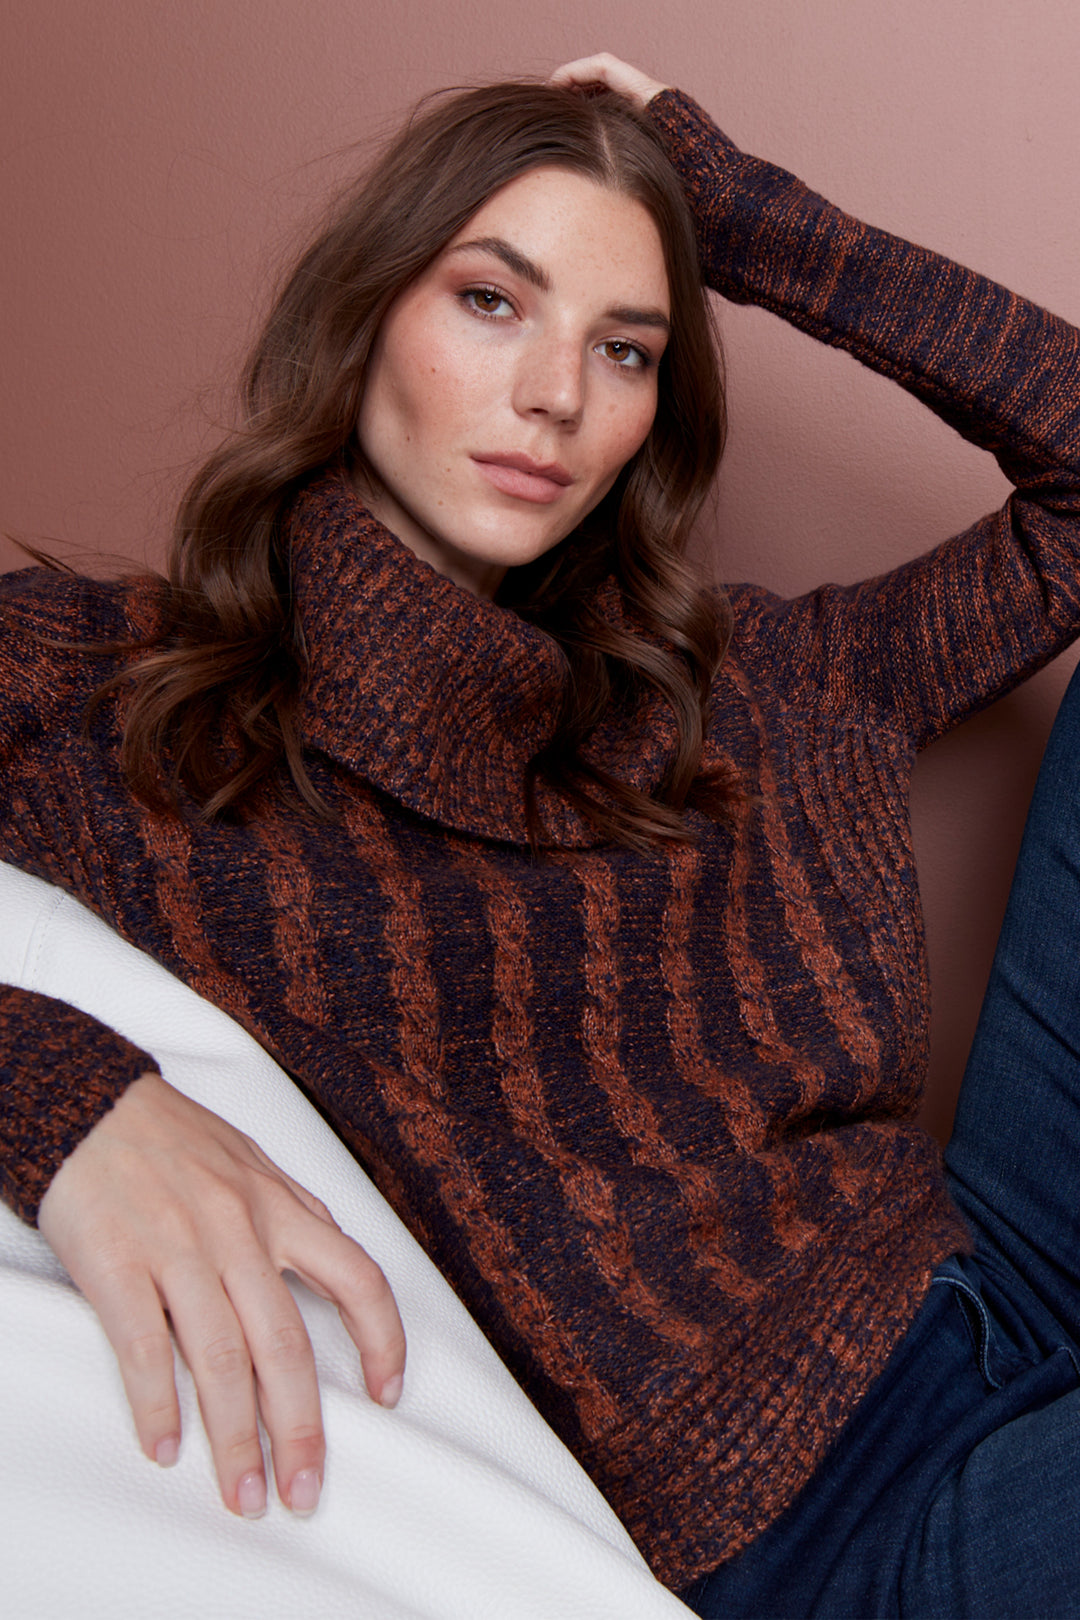 Look instantly stylish in this beautiful two-tone cable knit top. Crafted from a soft and cosy blend of yarns, this sweater features an intricate design pattern and two tones of cinnamon navy for a timeless look. Enjoy its cowl neck, standard to fitted size, and all day comfort. 